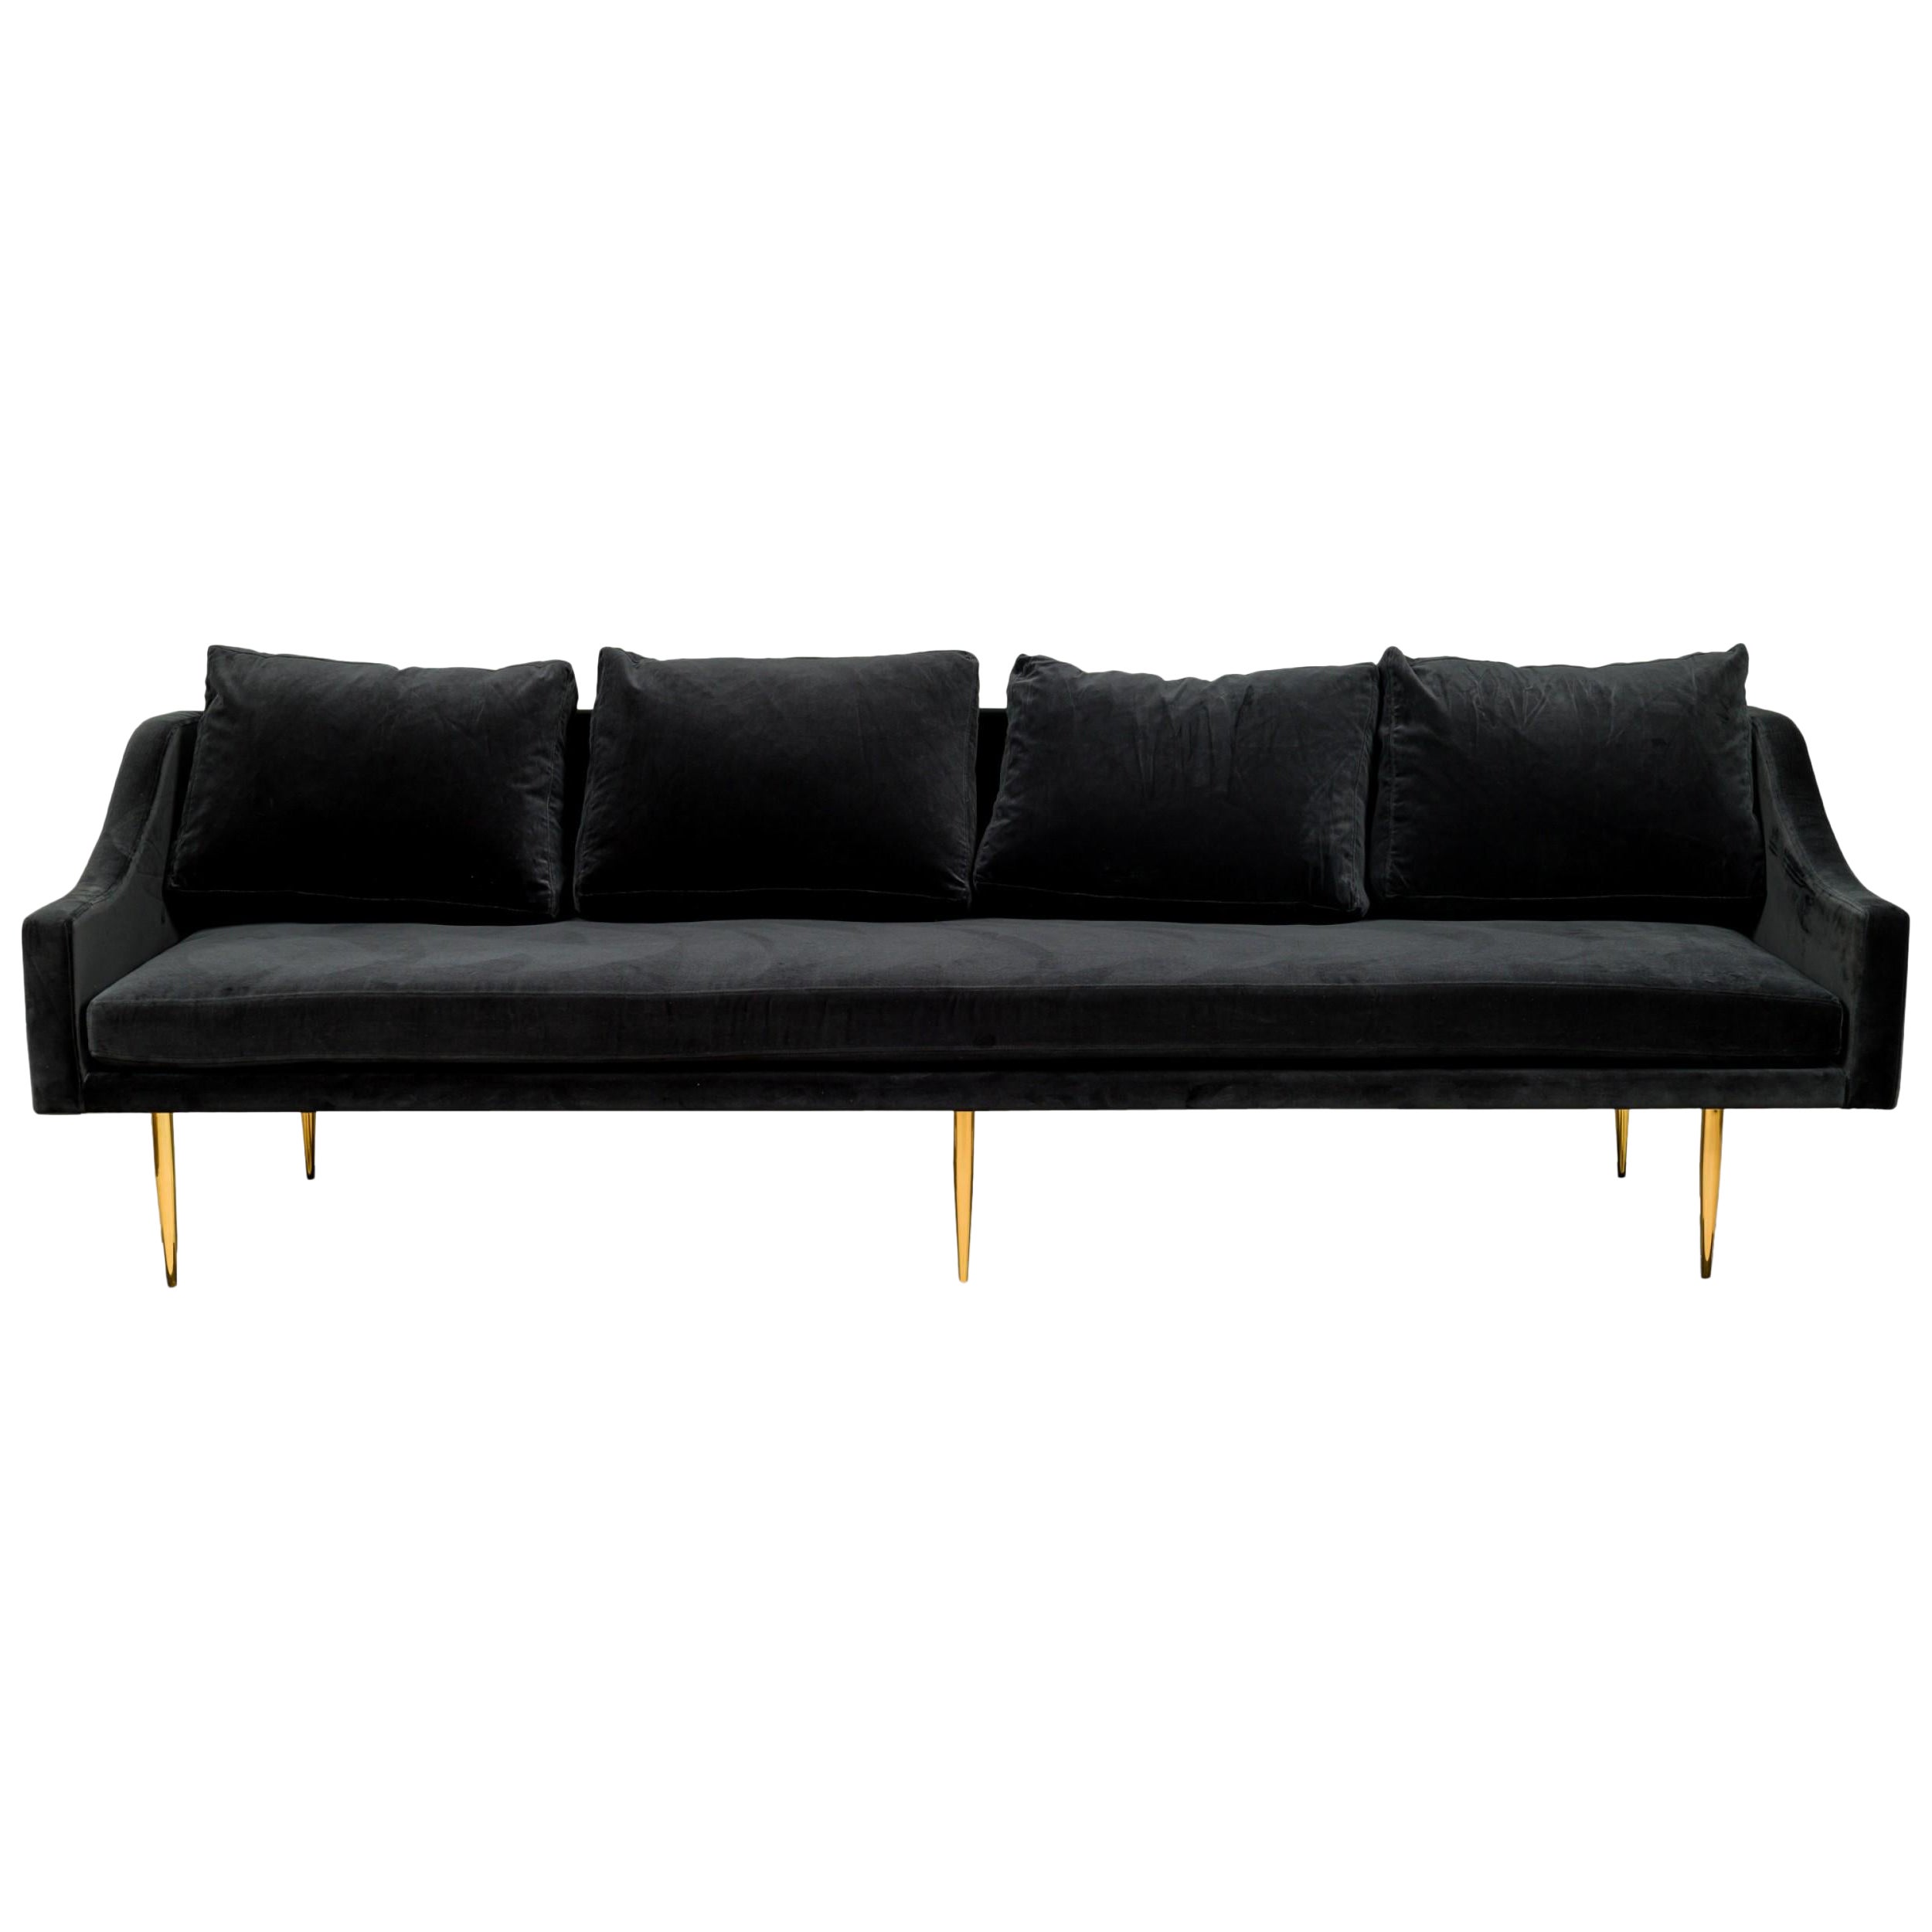 "Sintra" Contemporary Modern Charcoal Gray Velvet and Polished Bronze Sofa